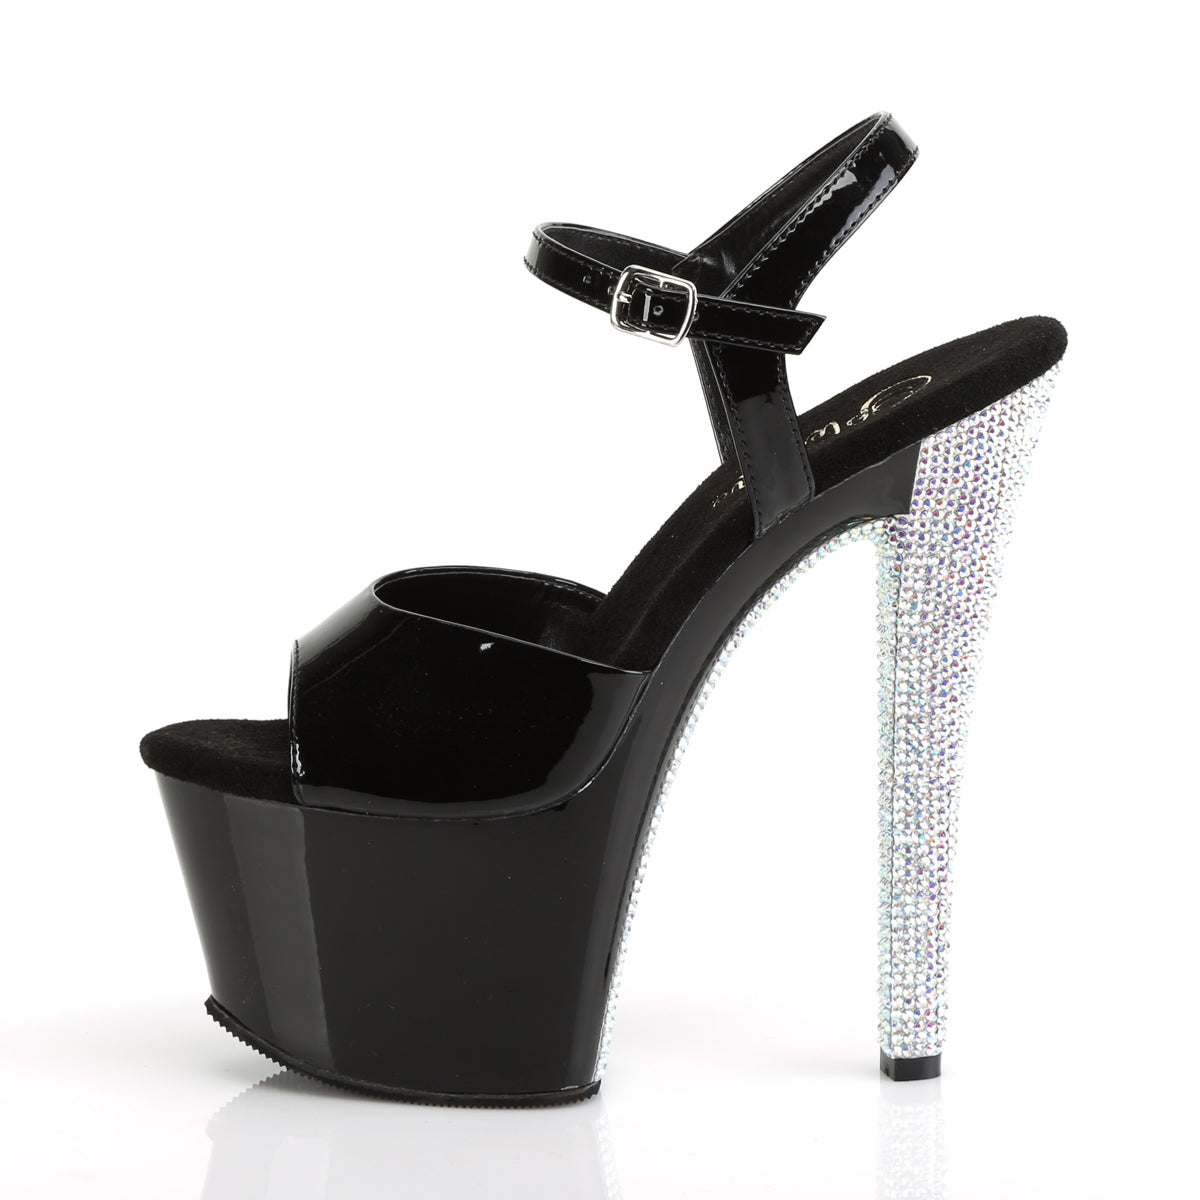 SKY-309CHRS 7" Heel Black and Silver Pole Dancing Platforms-Pleaser- Sexy Shoes Pole Dance Heels